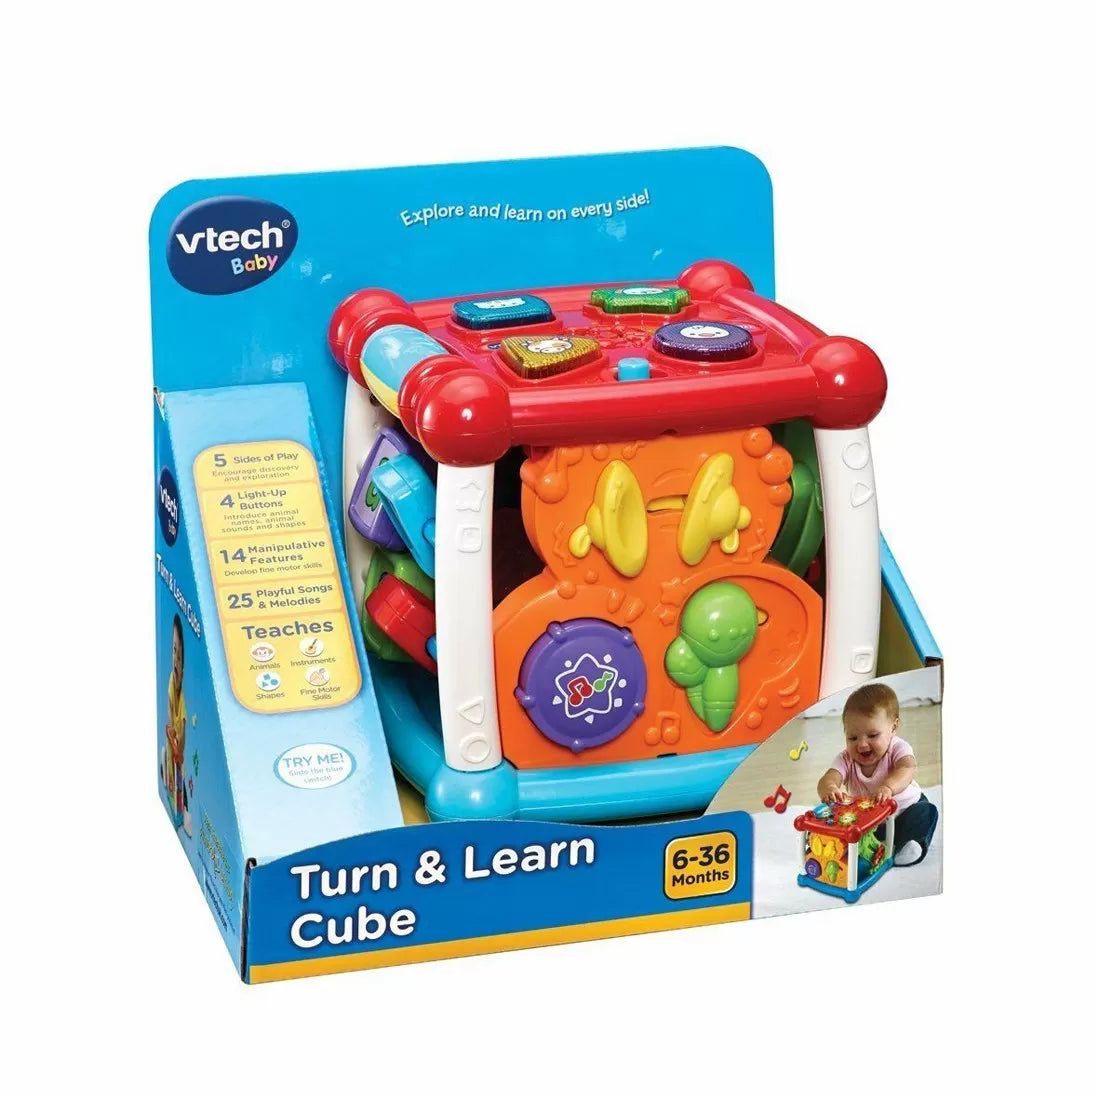 Vtech - Baby Turn and Learn Cube